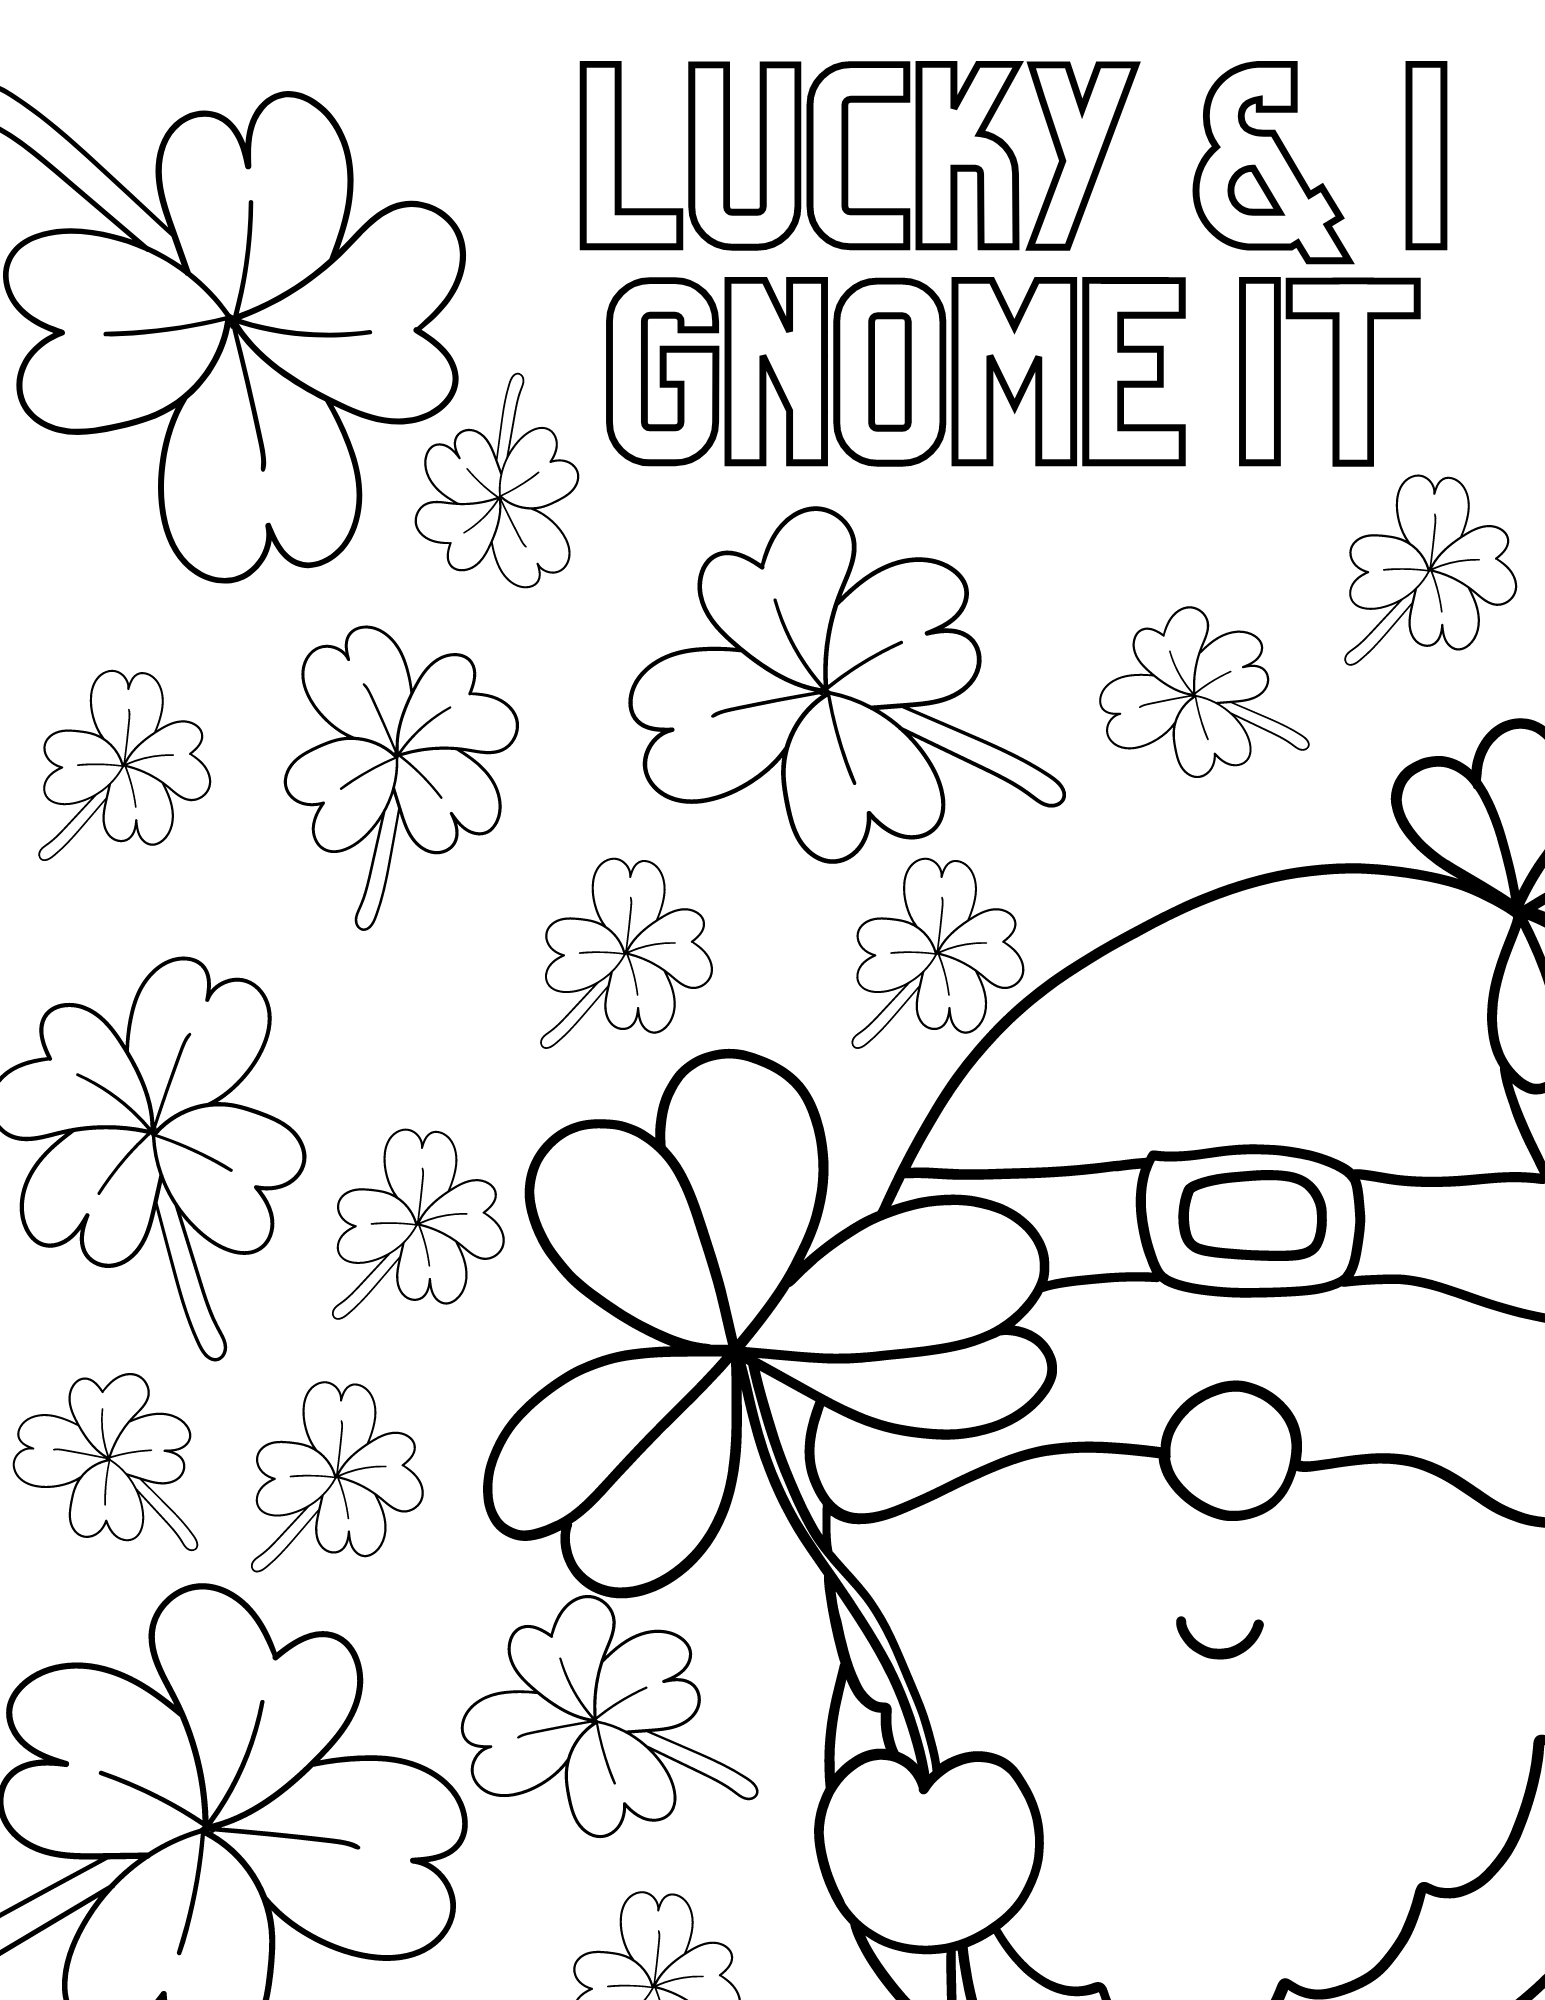 Free st patricks day gnomes coloring pages for kids and adults